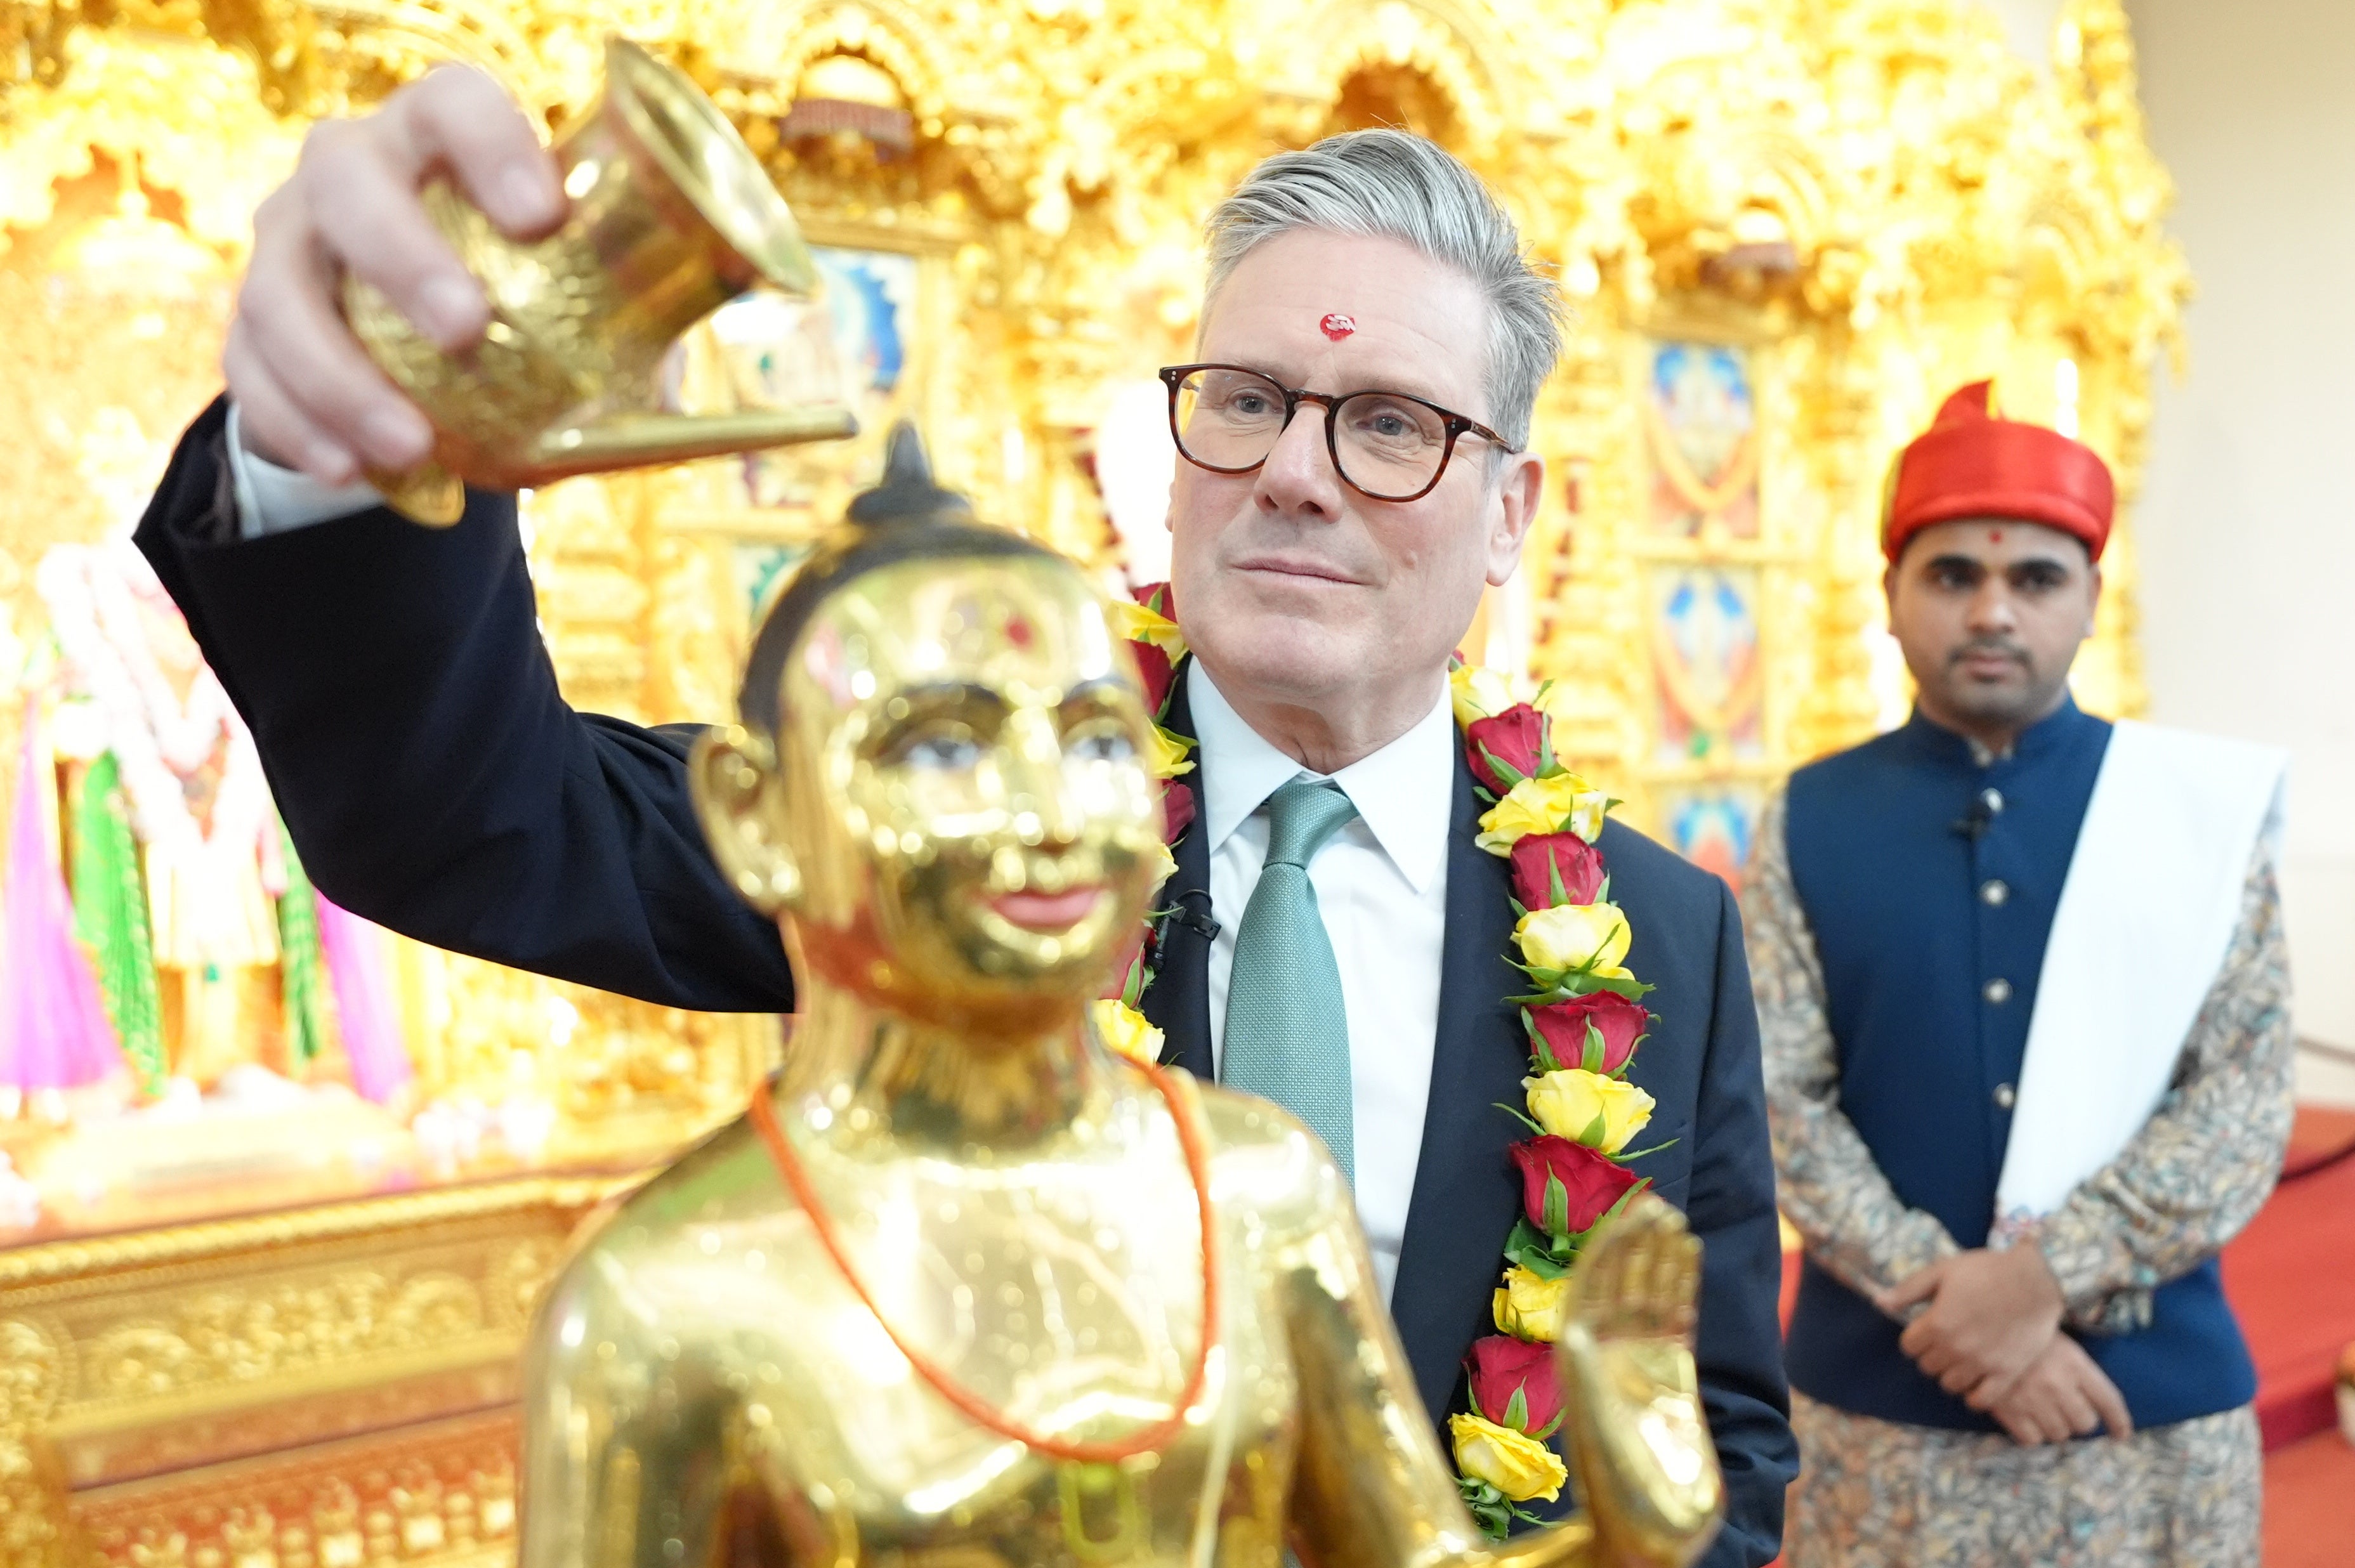 Labour Party leader Sir Keir Starmer during a visit to a Hindu temple in London, while on the General Election campaign trail (Stefan Rousseau/PA)